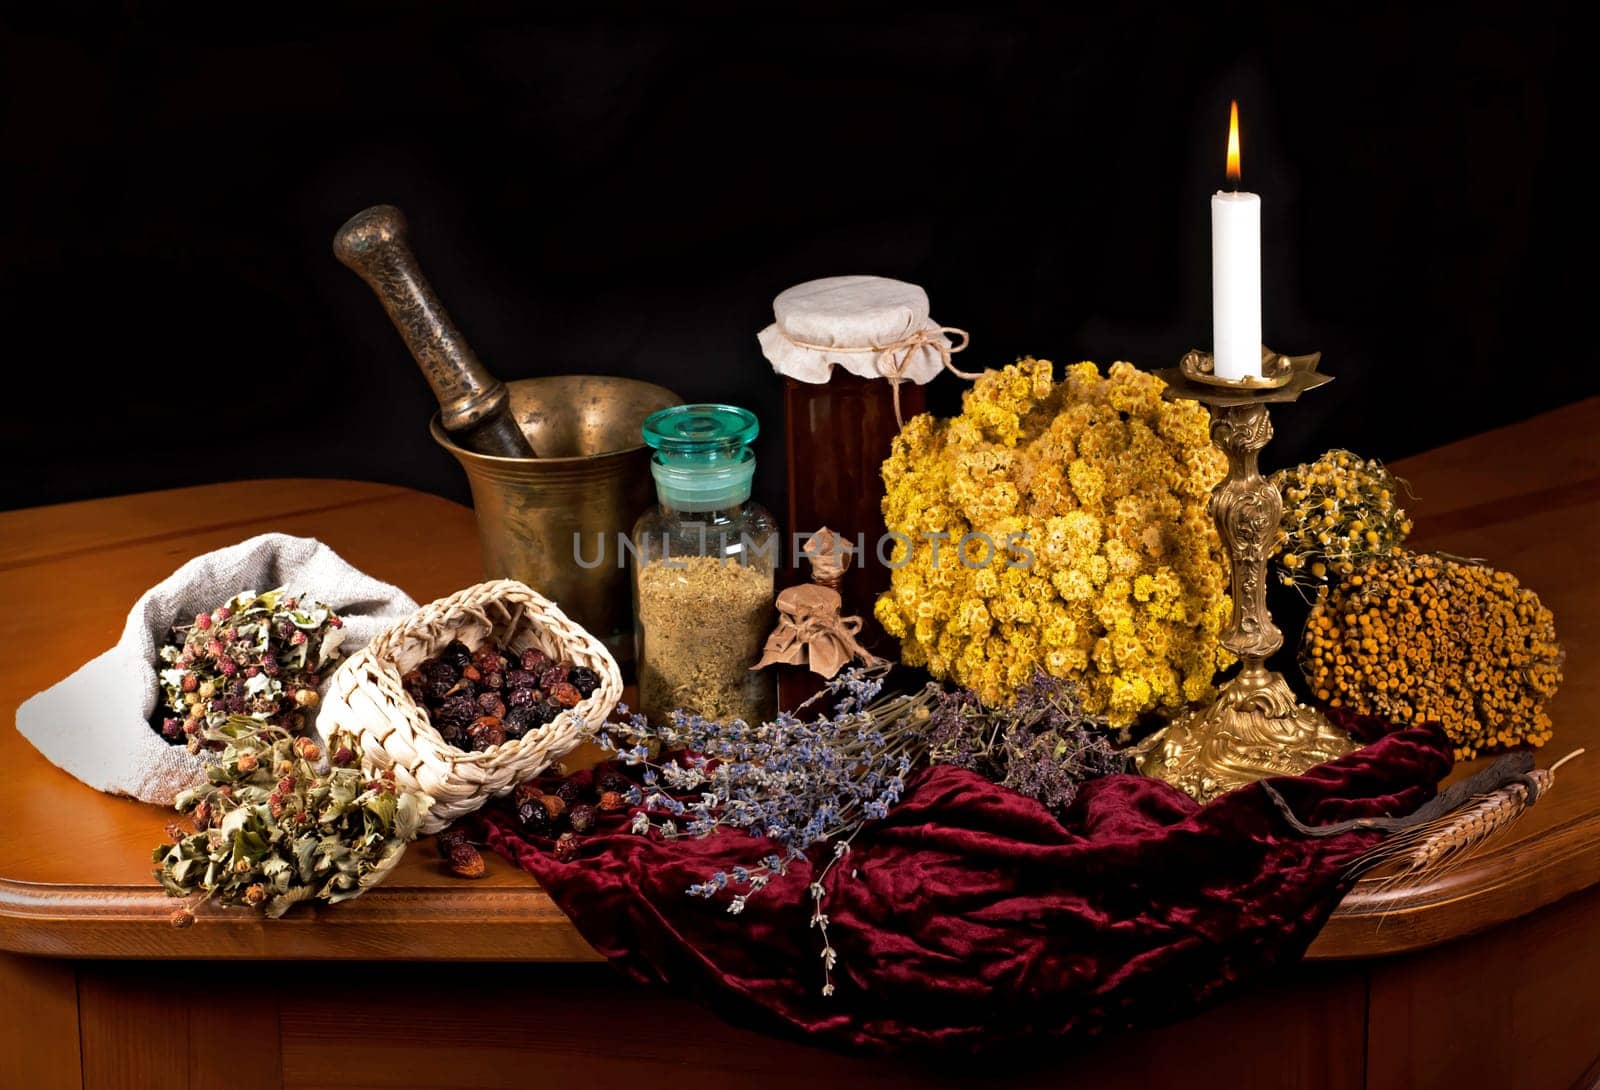 Close up of healing herbs alchemist stuff. Old pharmacy, alternative medicine concept. mortar and pestle. on a black background. wooden table. Dried healing herbs, flowers and candles, ritual purification , copyspace